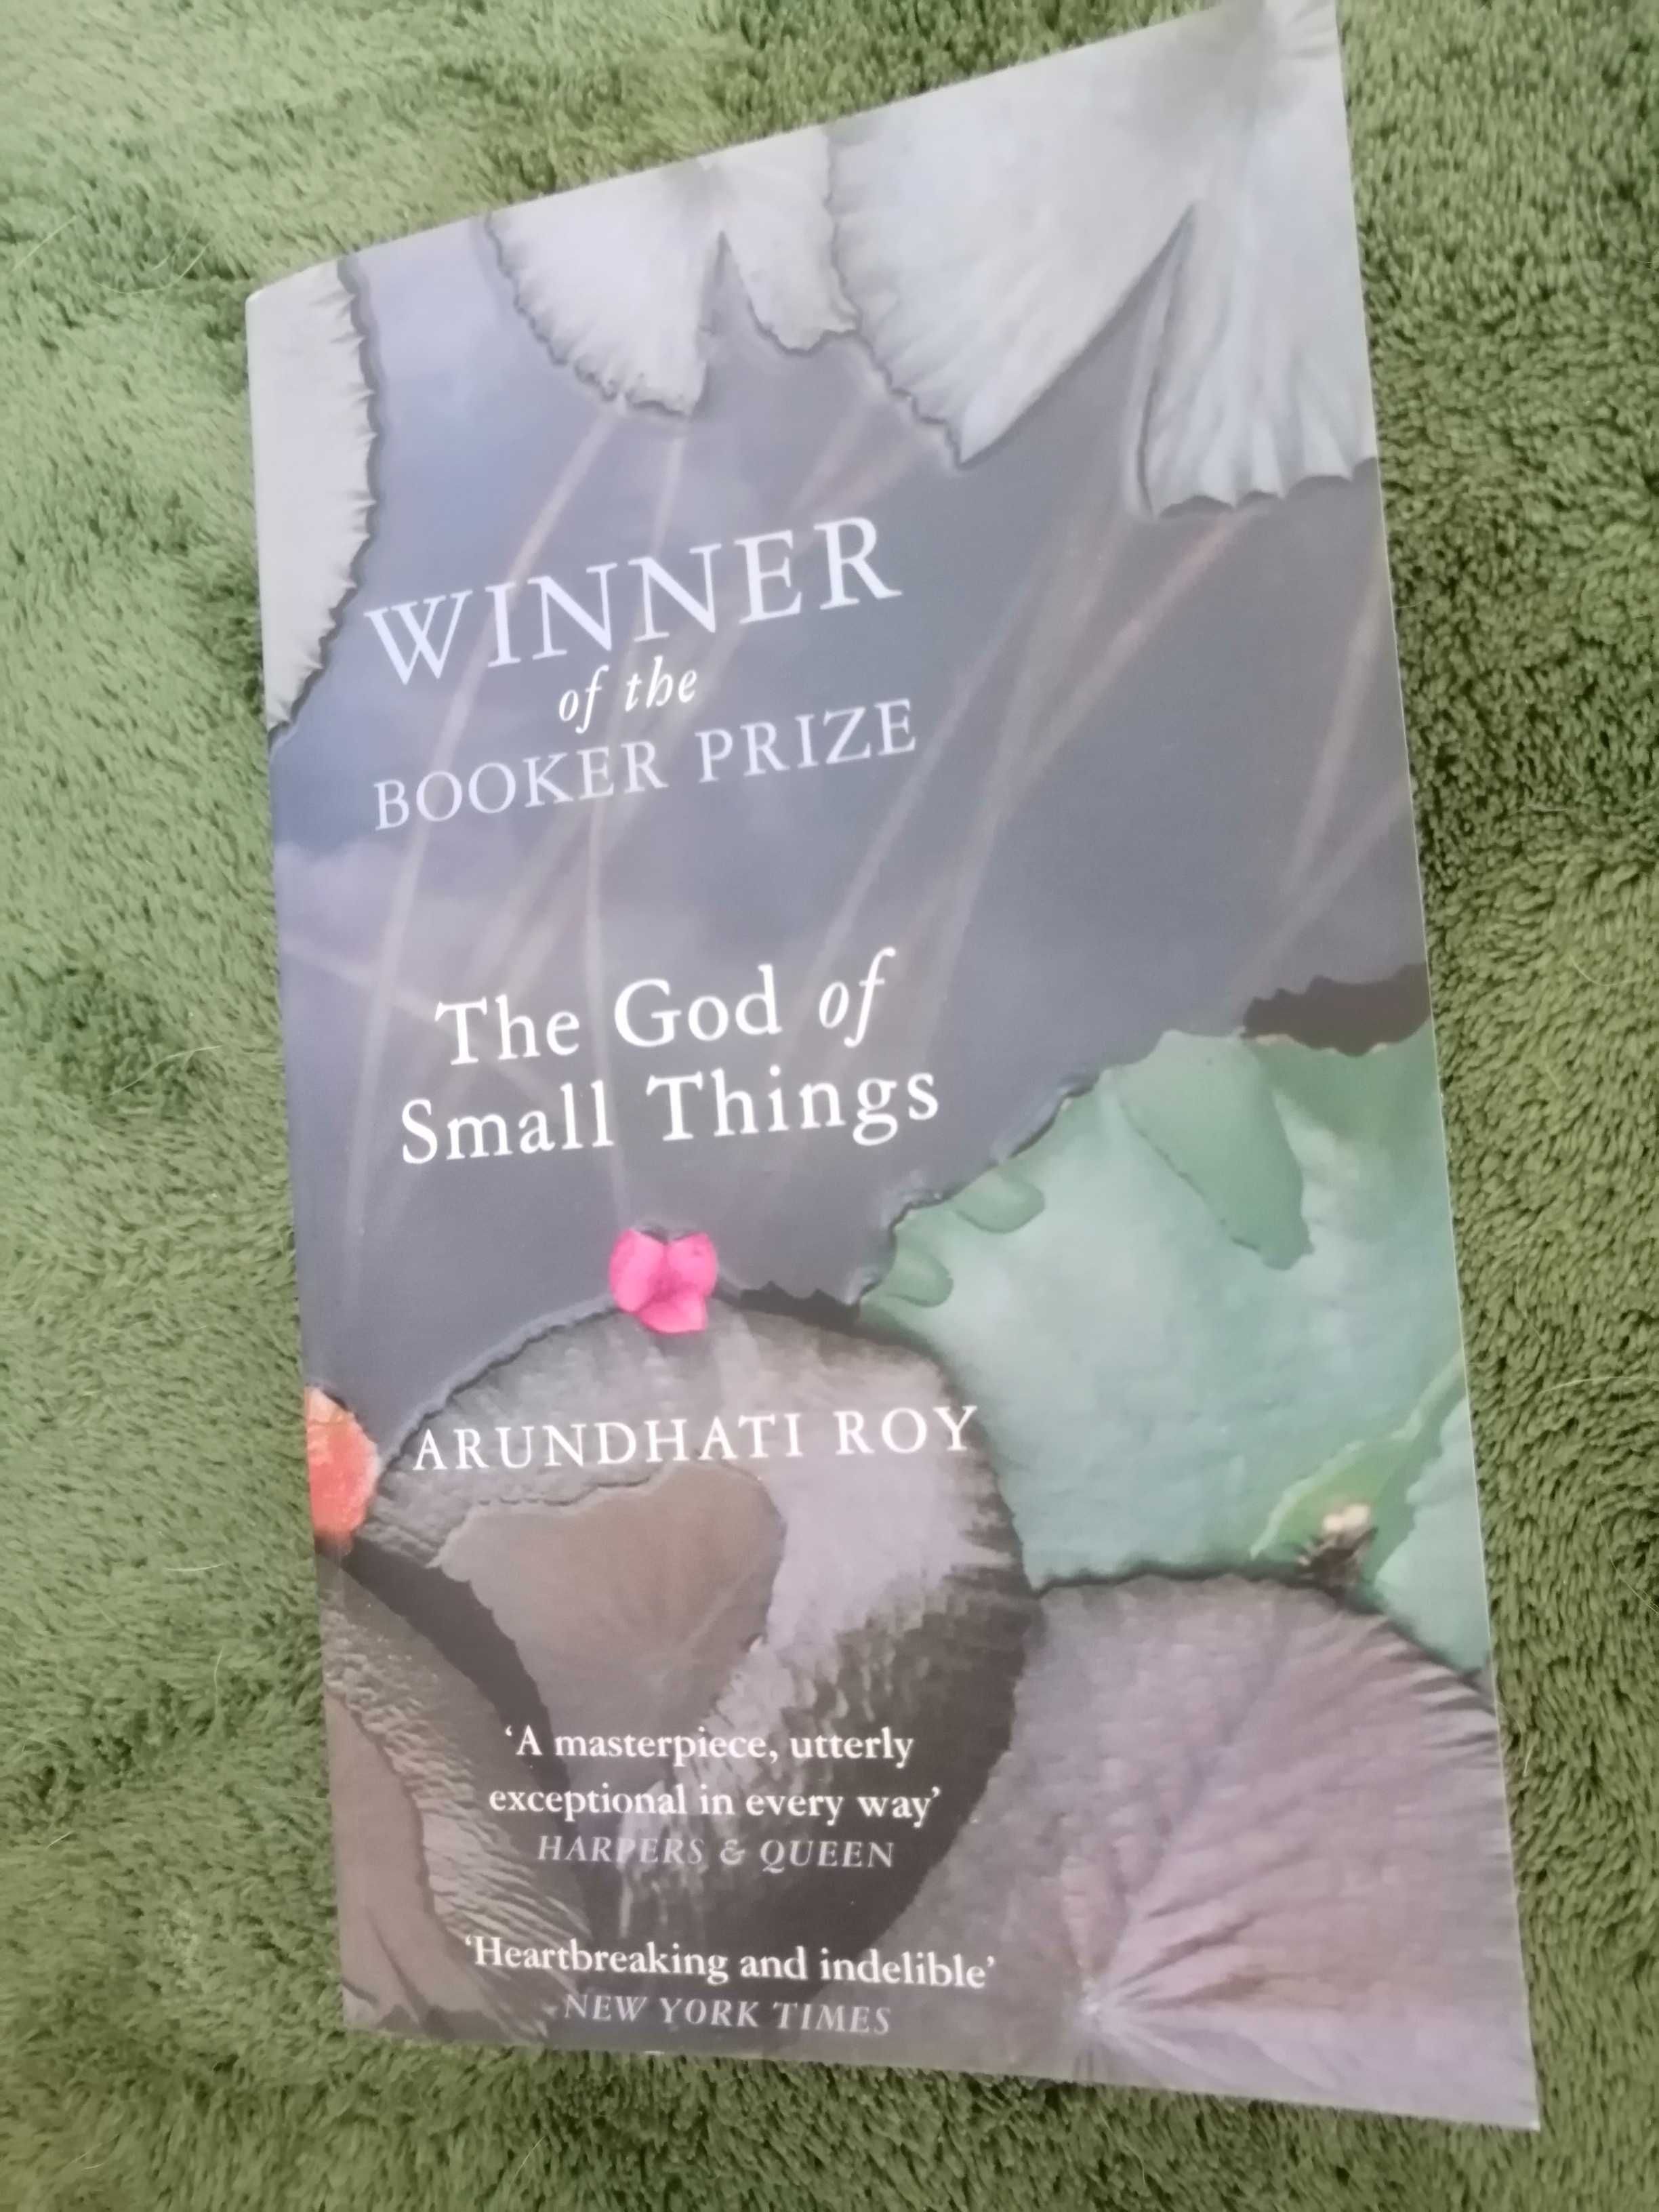 The God of small things - Arundhati Roy